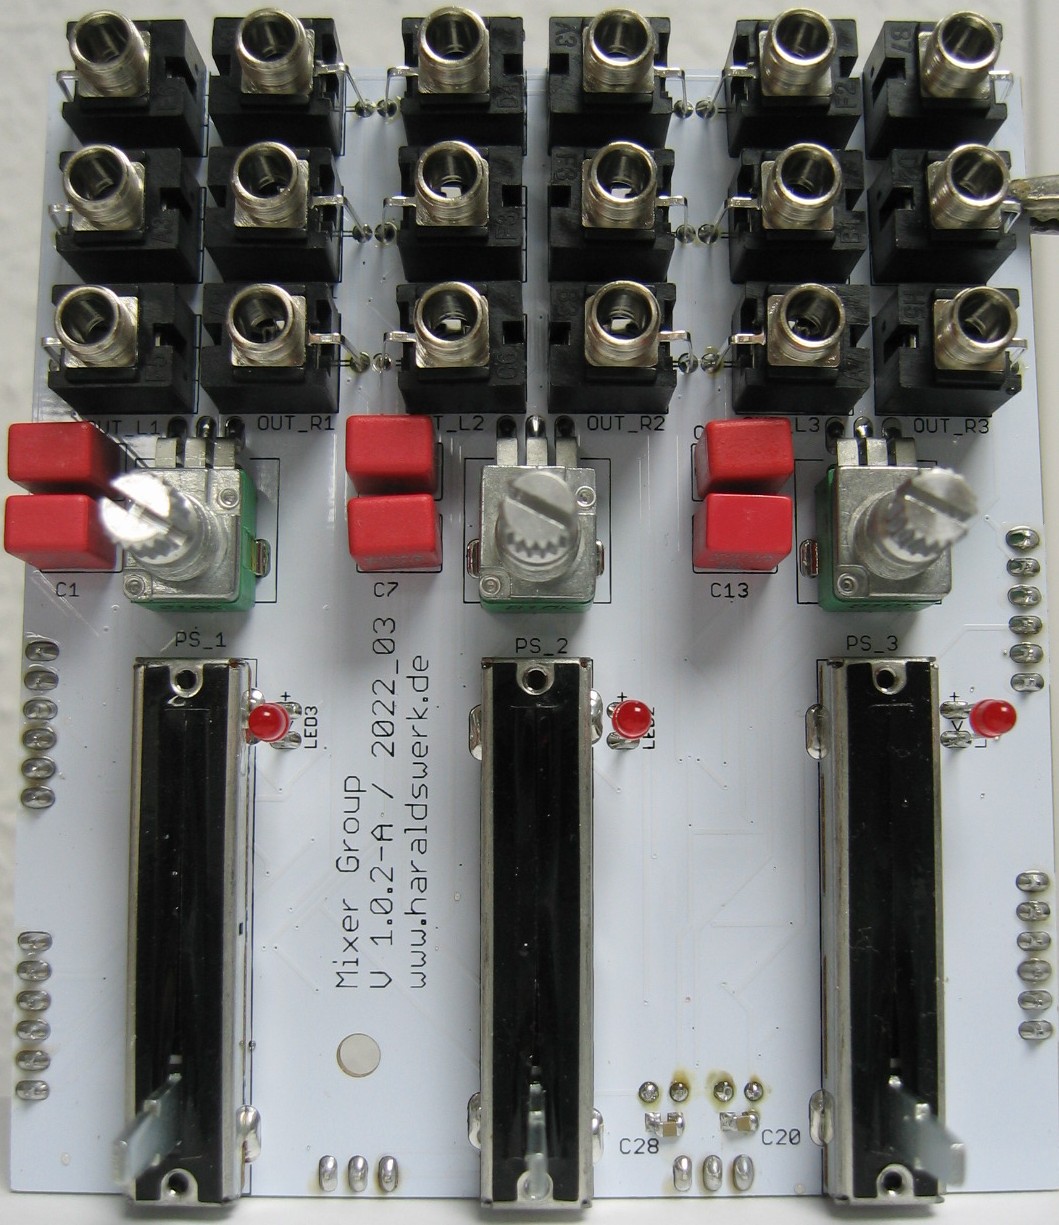 Performance Mixer Group populated control PCB top